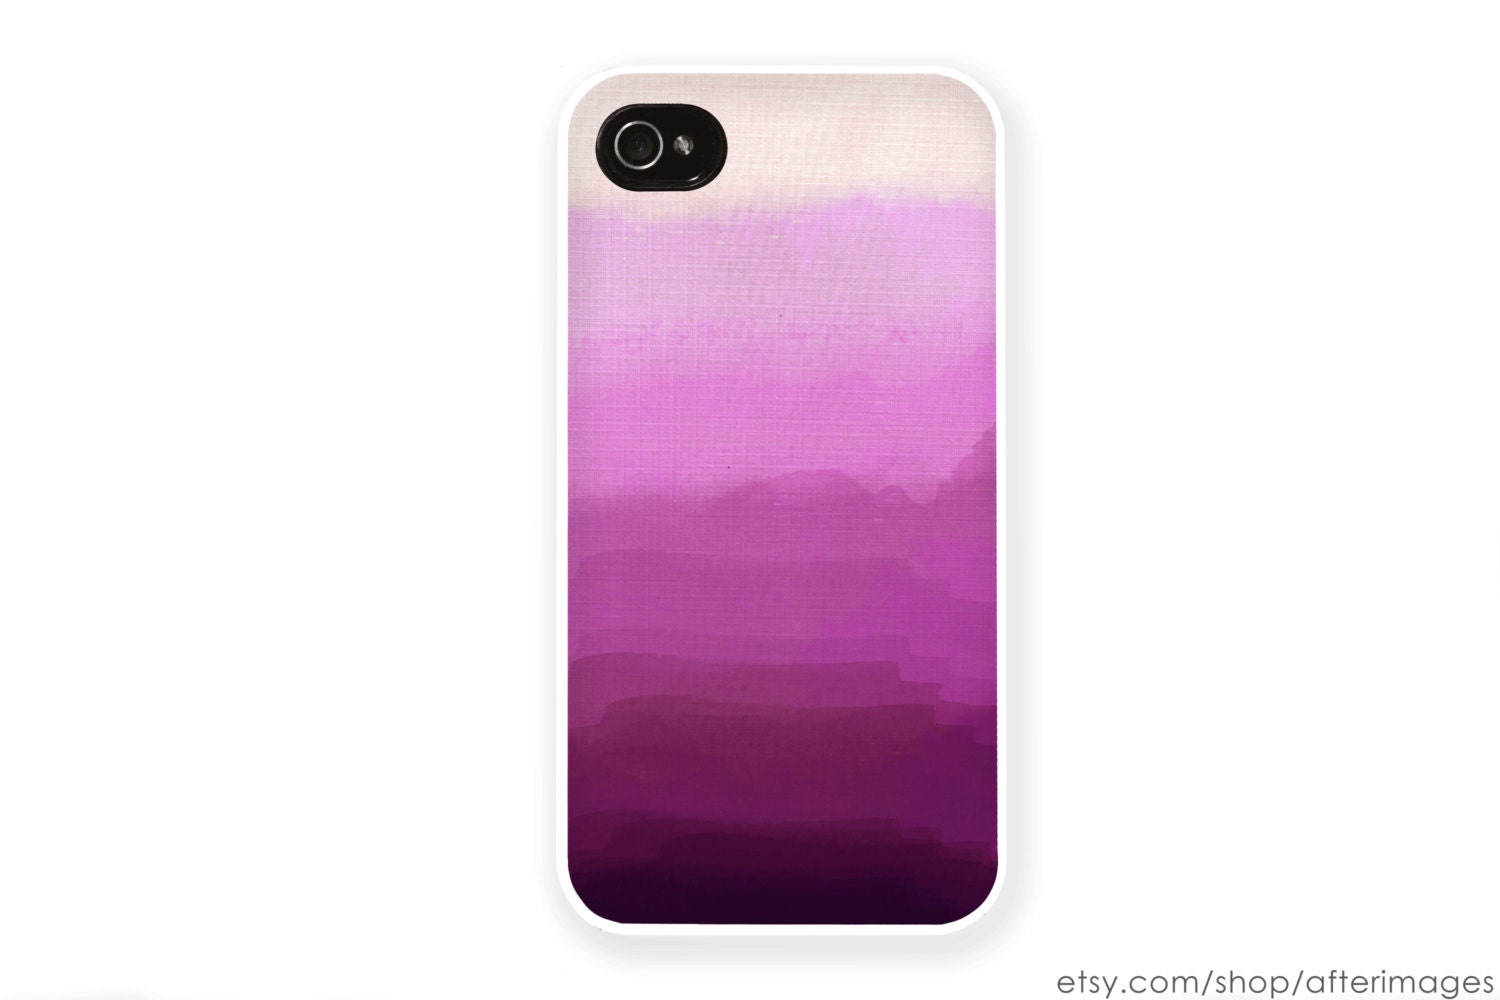 Radiant Orchid iPhone Case / Lavender Ombre iPhone 4 Case iPhone 5S Case Radiant Orchid Ombre iPhone 5 Case iPhone 4S Case iPhone 5C Case - afterimages